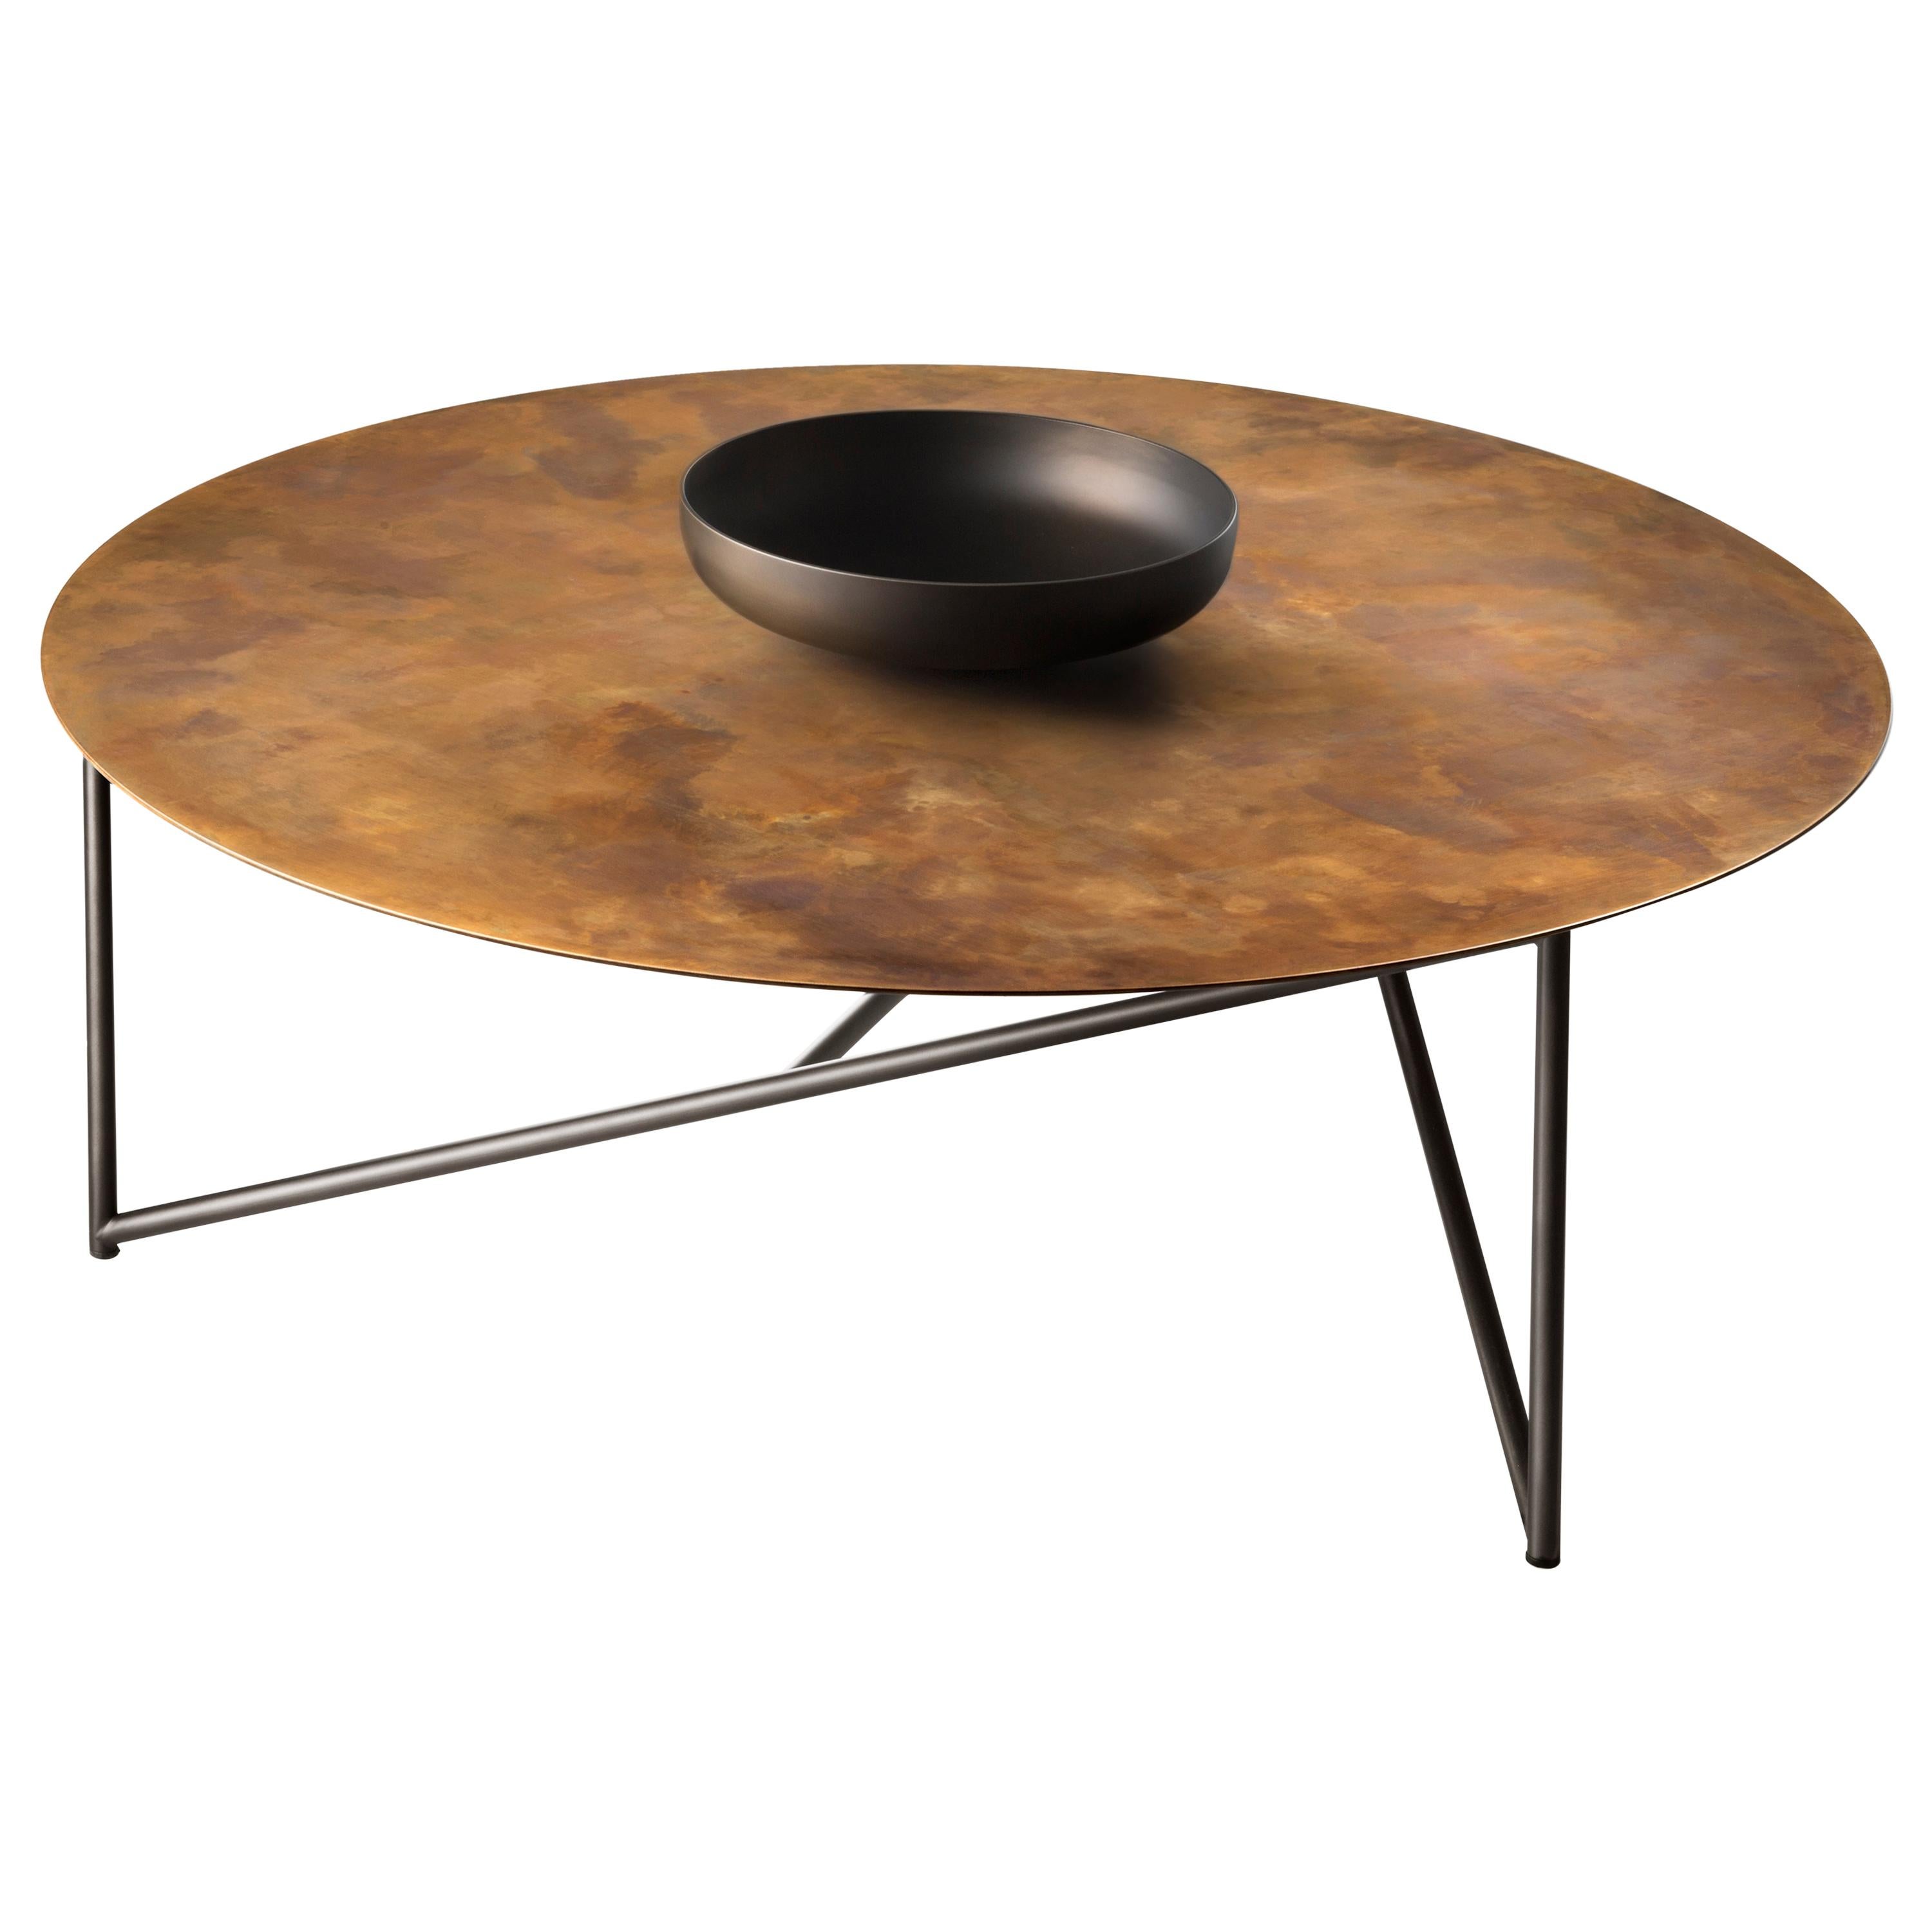 DeCastelli Parsec 120 Brass Coffee Table with Central Metal Bowl by Emilio Nanni For Sale